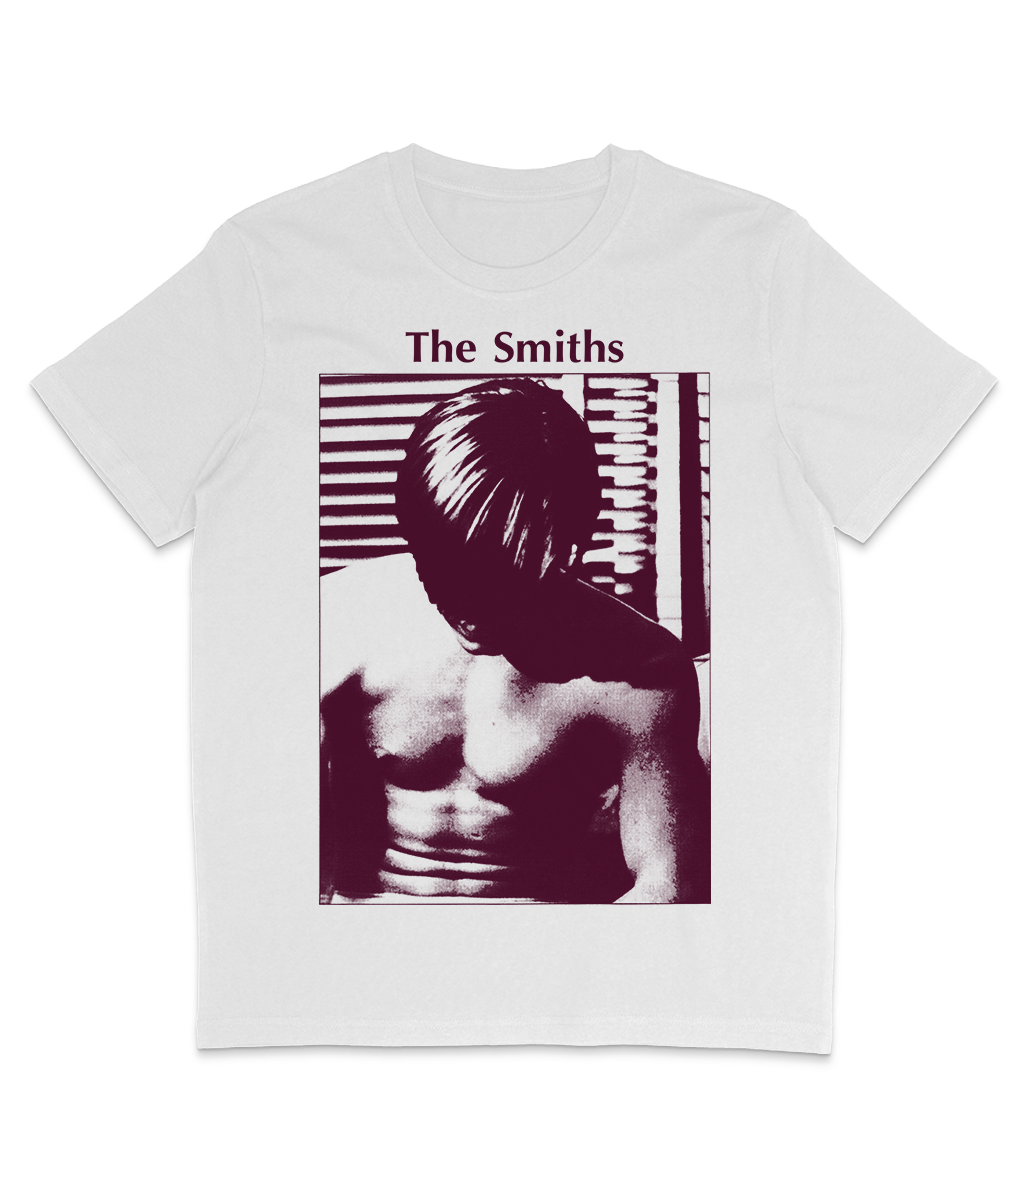 The Smiths - The Smiths - 1984